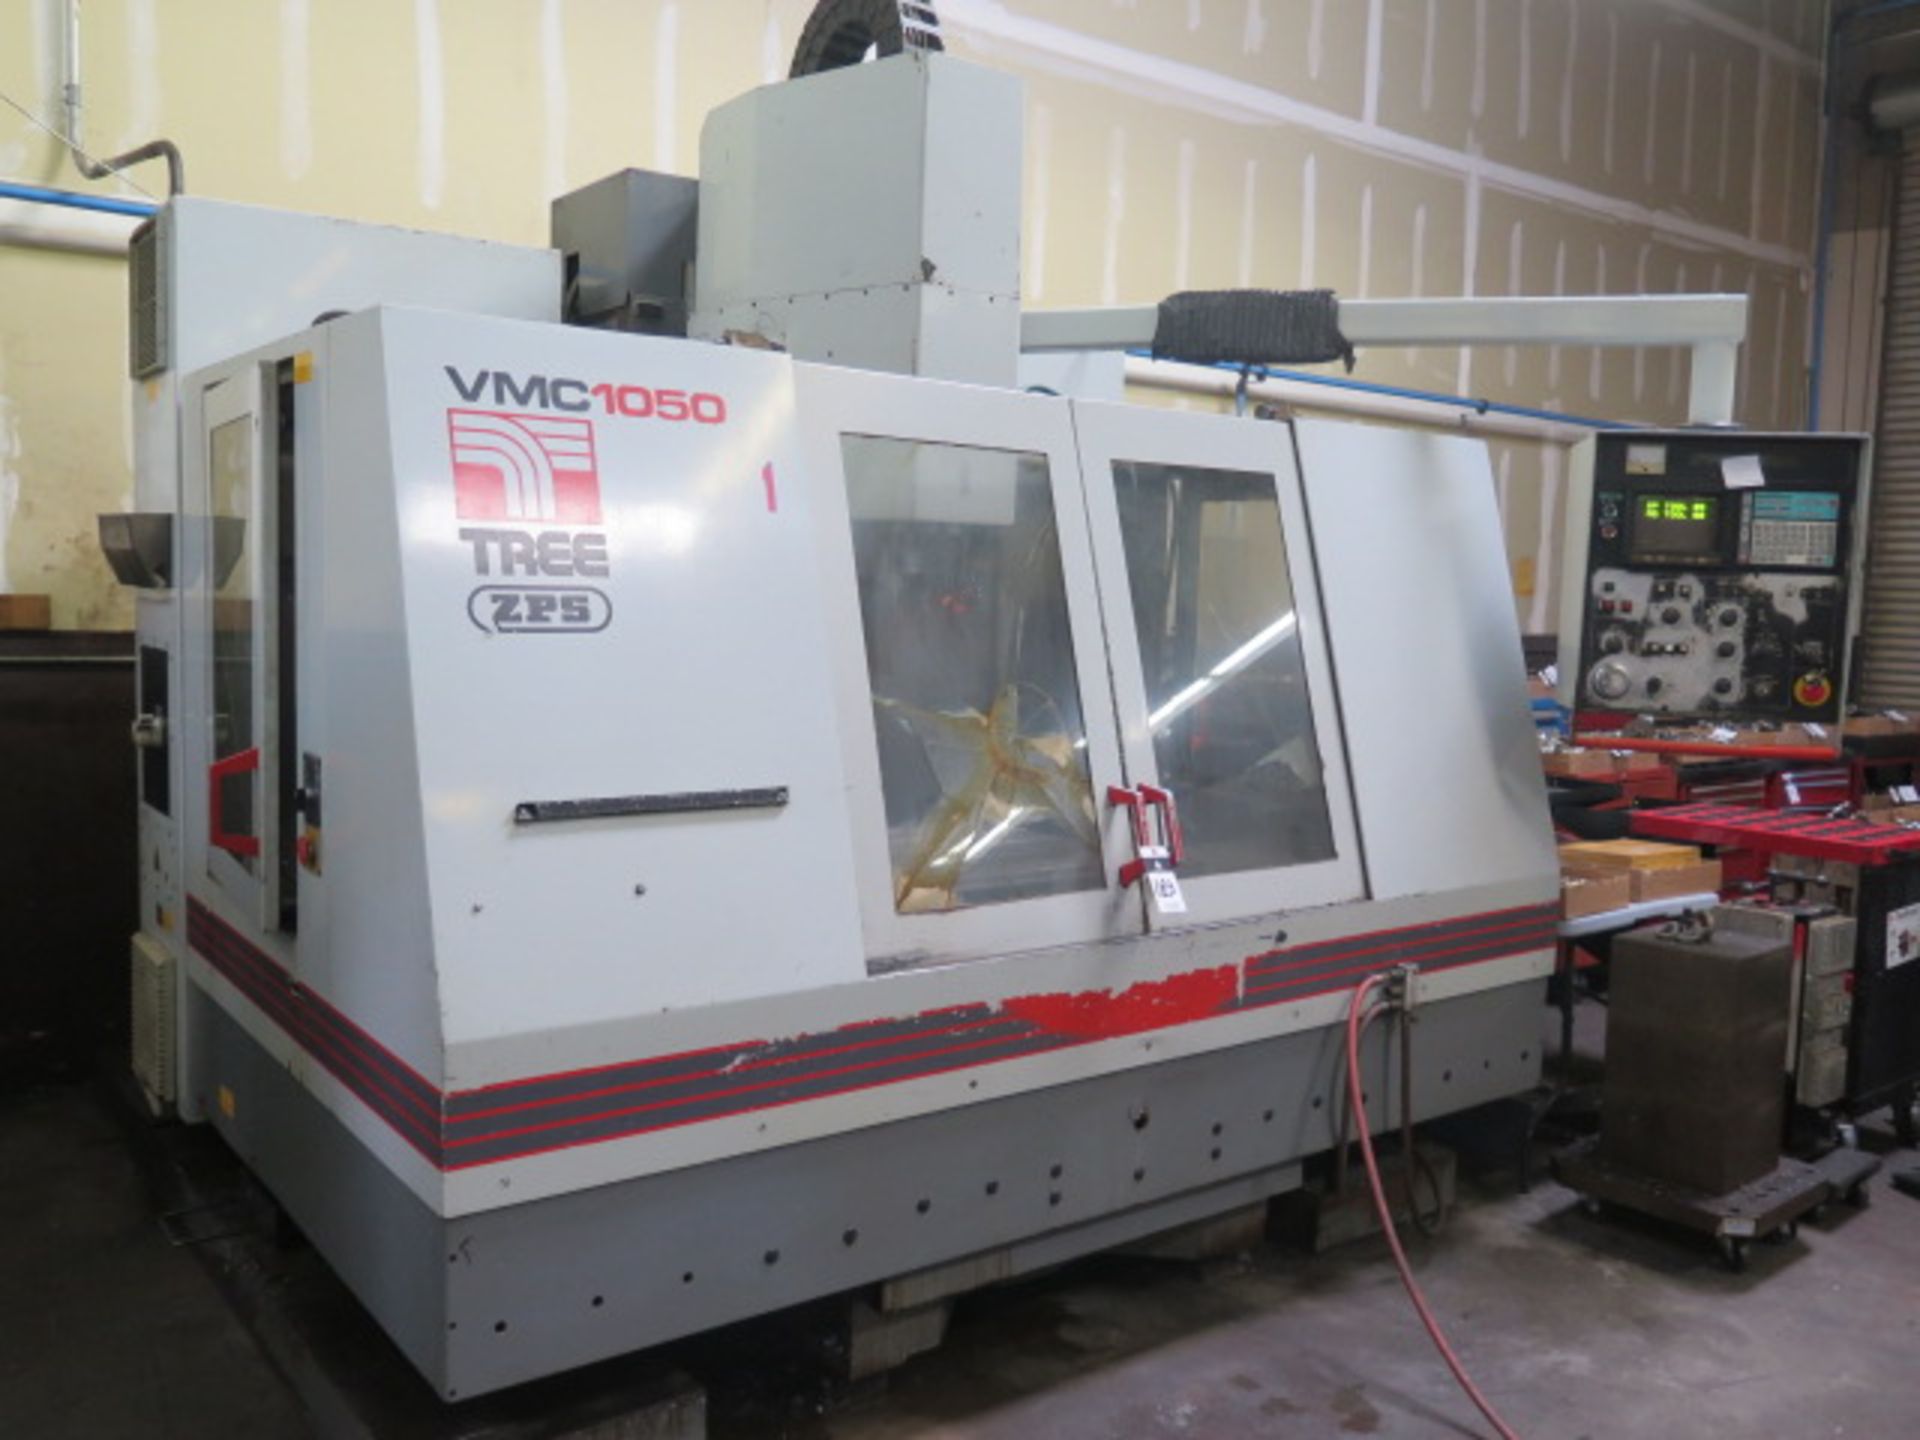 Tree ZPS VMC-1050/24 CNC Vertical Machining Center s/n 9-20-93-1155 w/ Yasnac Controls, 24-Station - Image 2 of 11